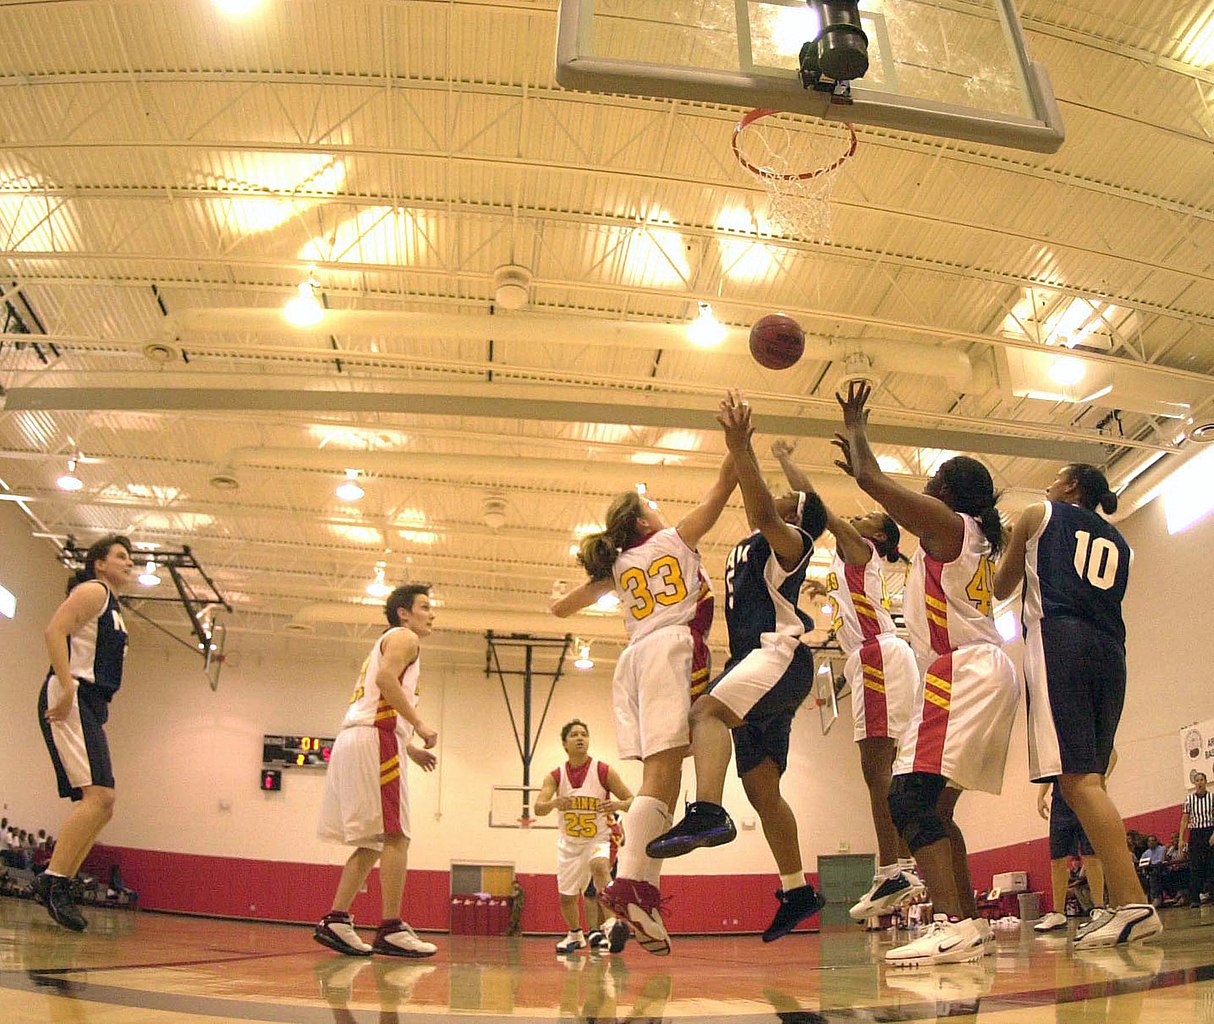 px us navy players from the all navy and marine corps women's basketball teams fight for rebound